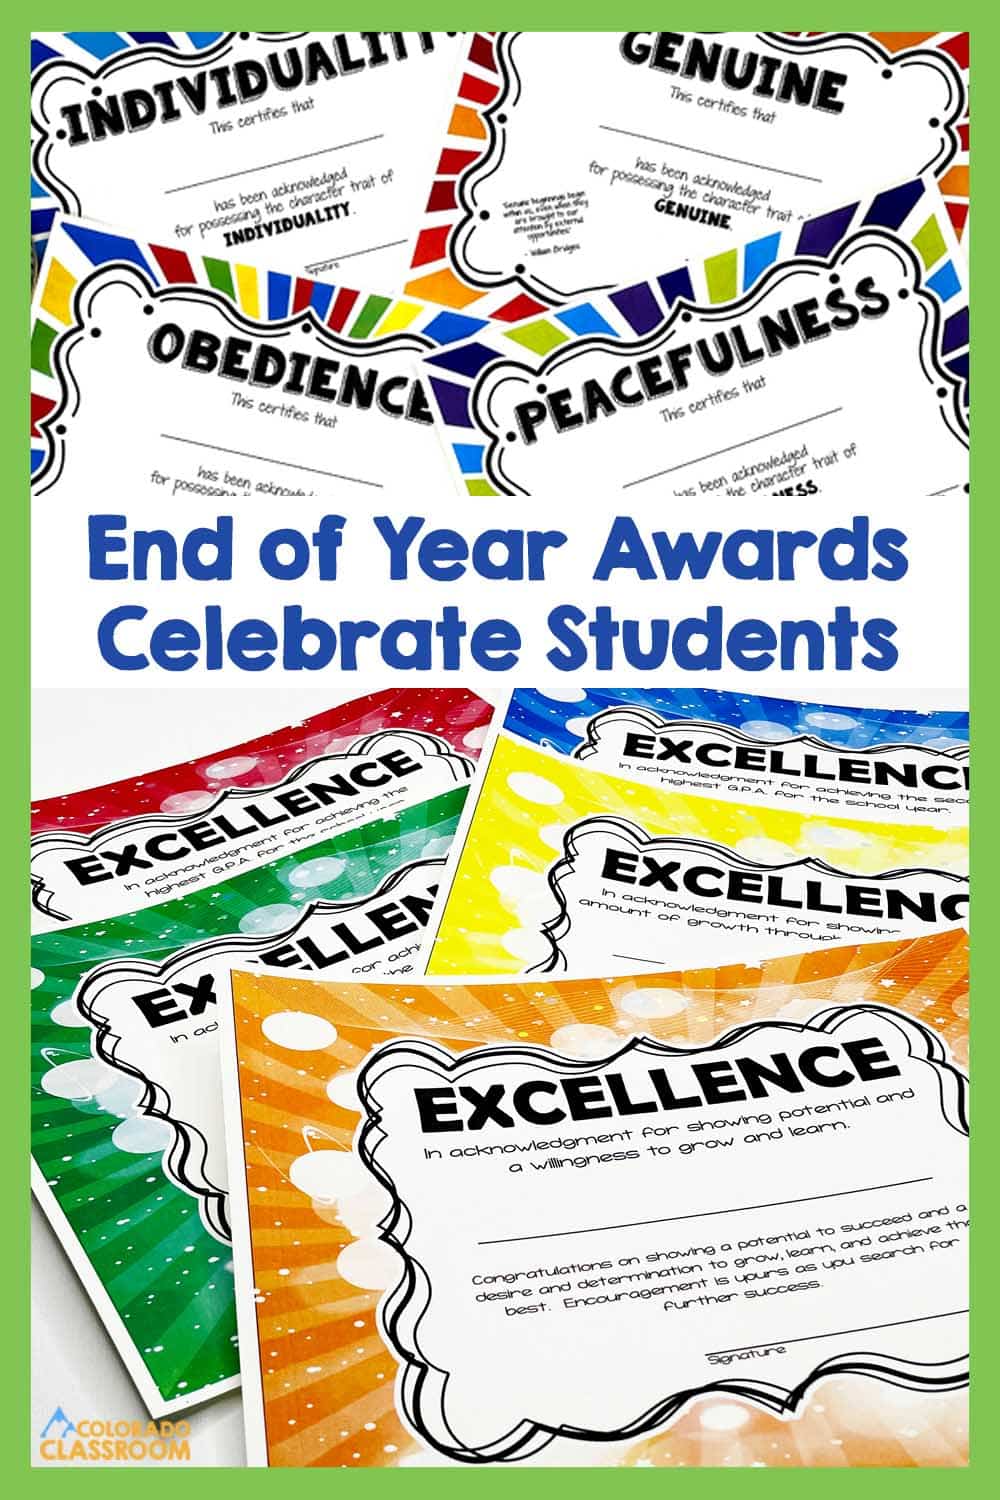 Character awards and honor roll certificates are displayed with the text, "End of Year Awards Celebrate Students"